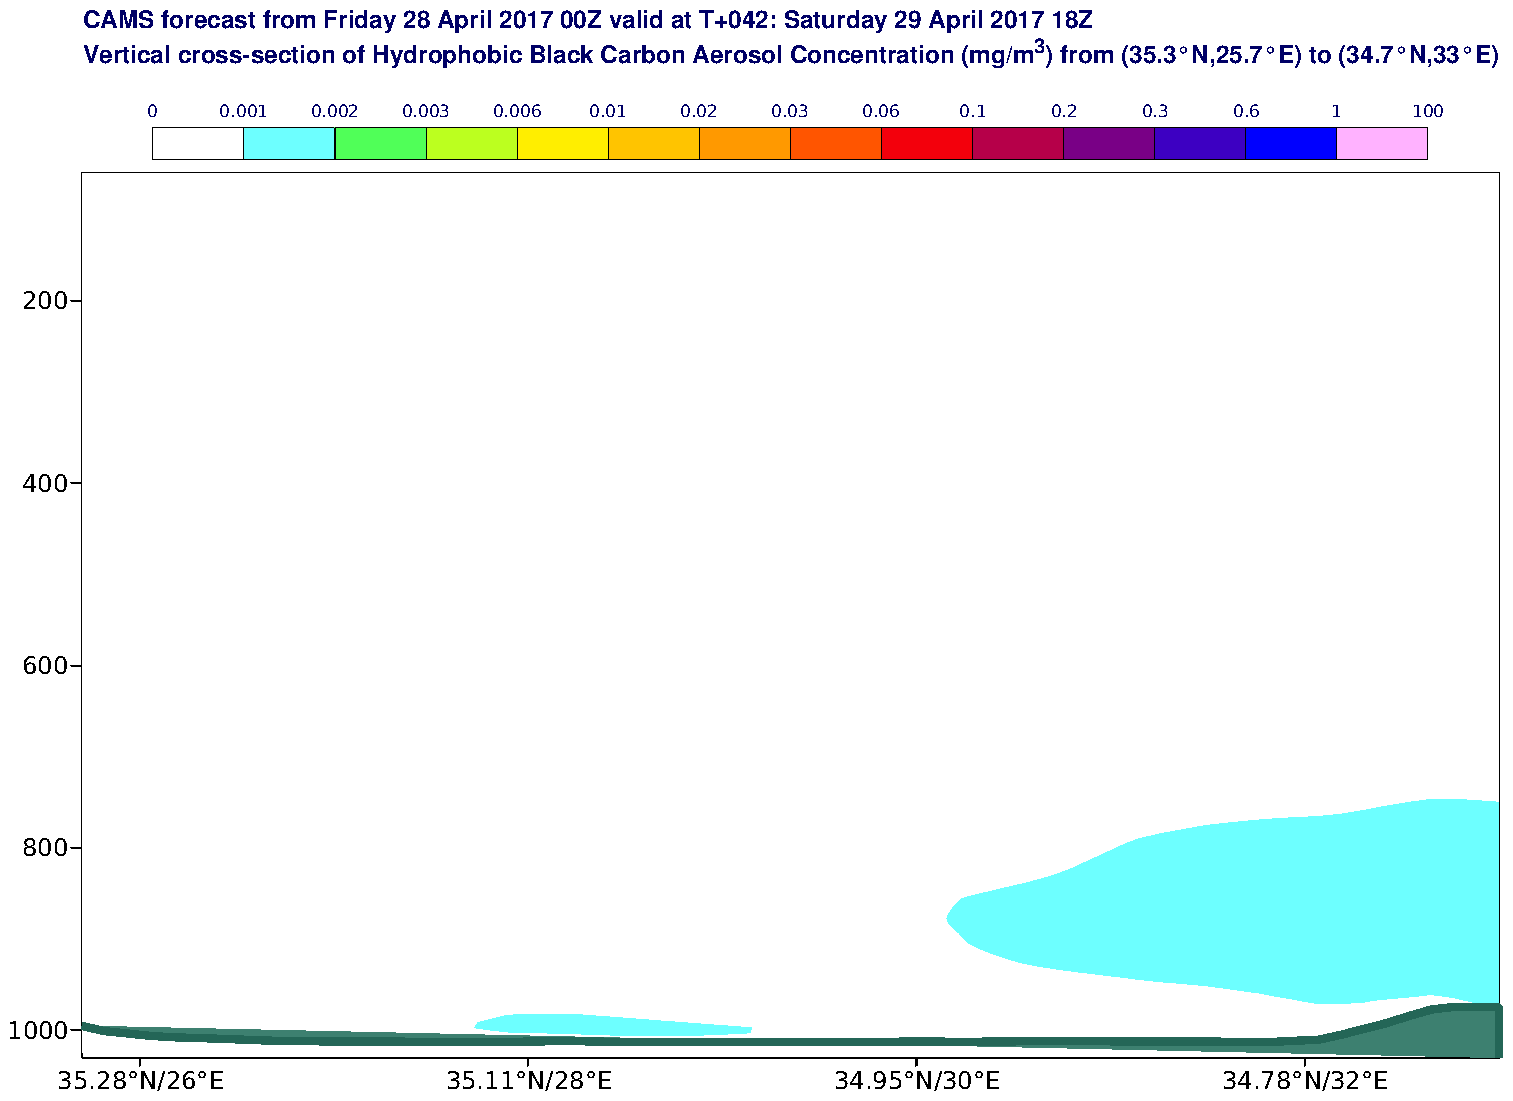 Vertical cross-section of Hydrophobic Black Carbon Aerosol Concentration (mg/m3) valid at T42 - 2017-04-29 18:00